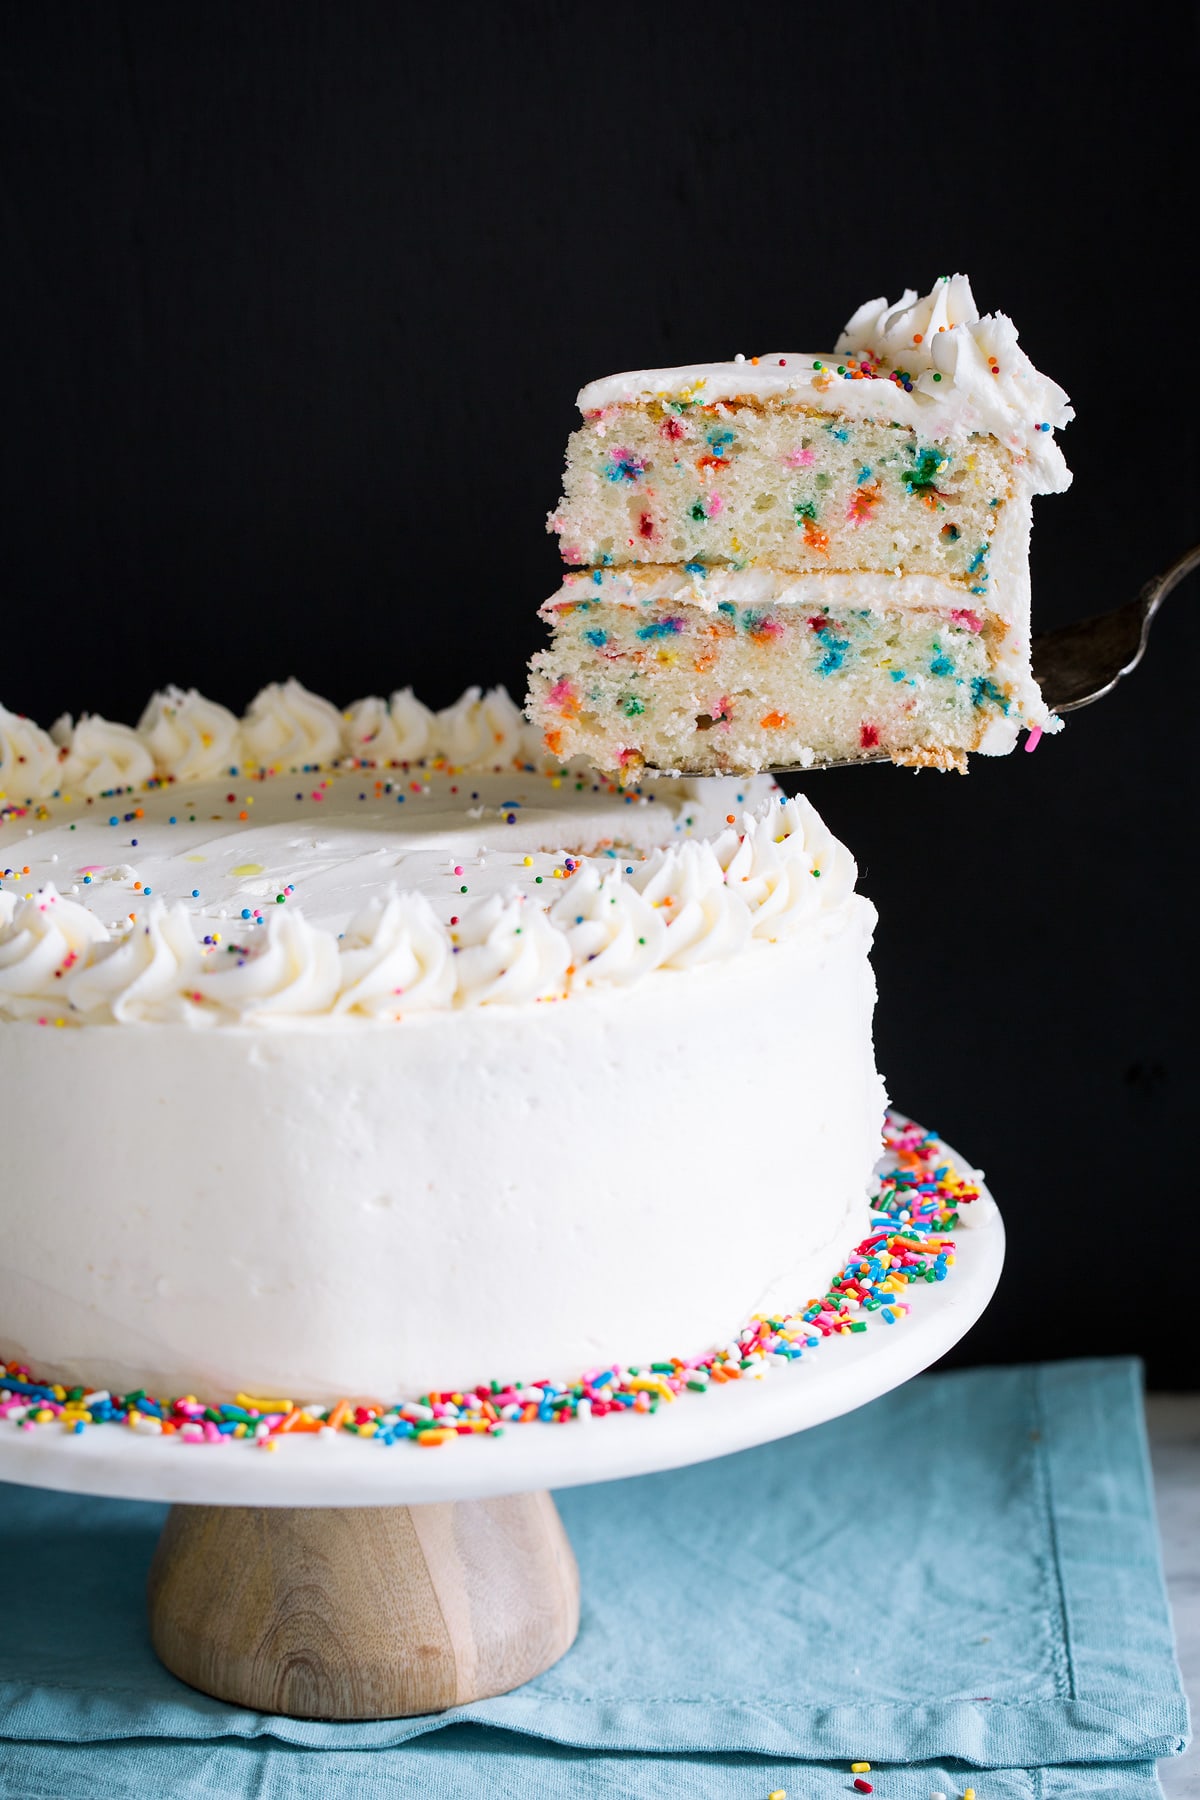 Lifting a single slice with a serving spatula from a whole cake.